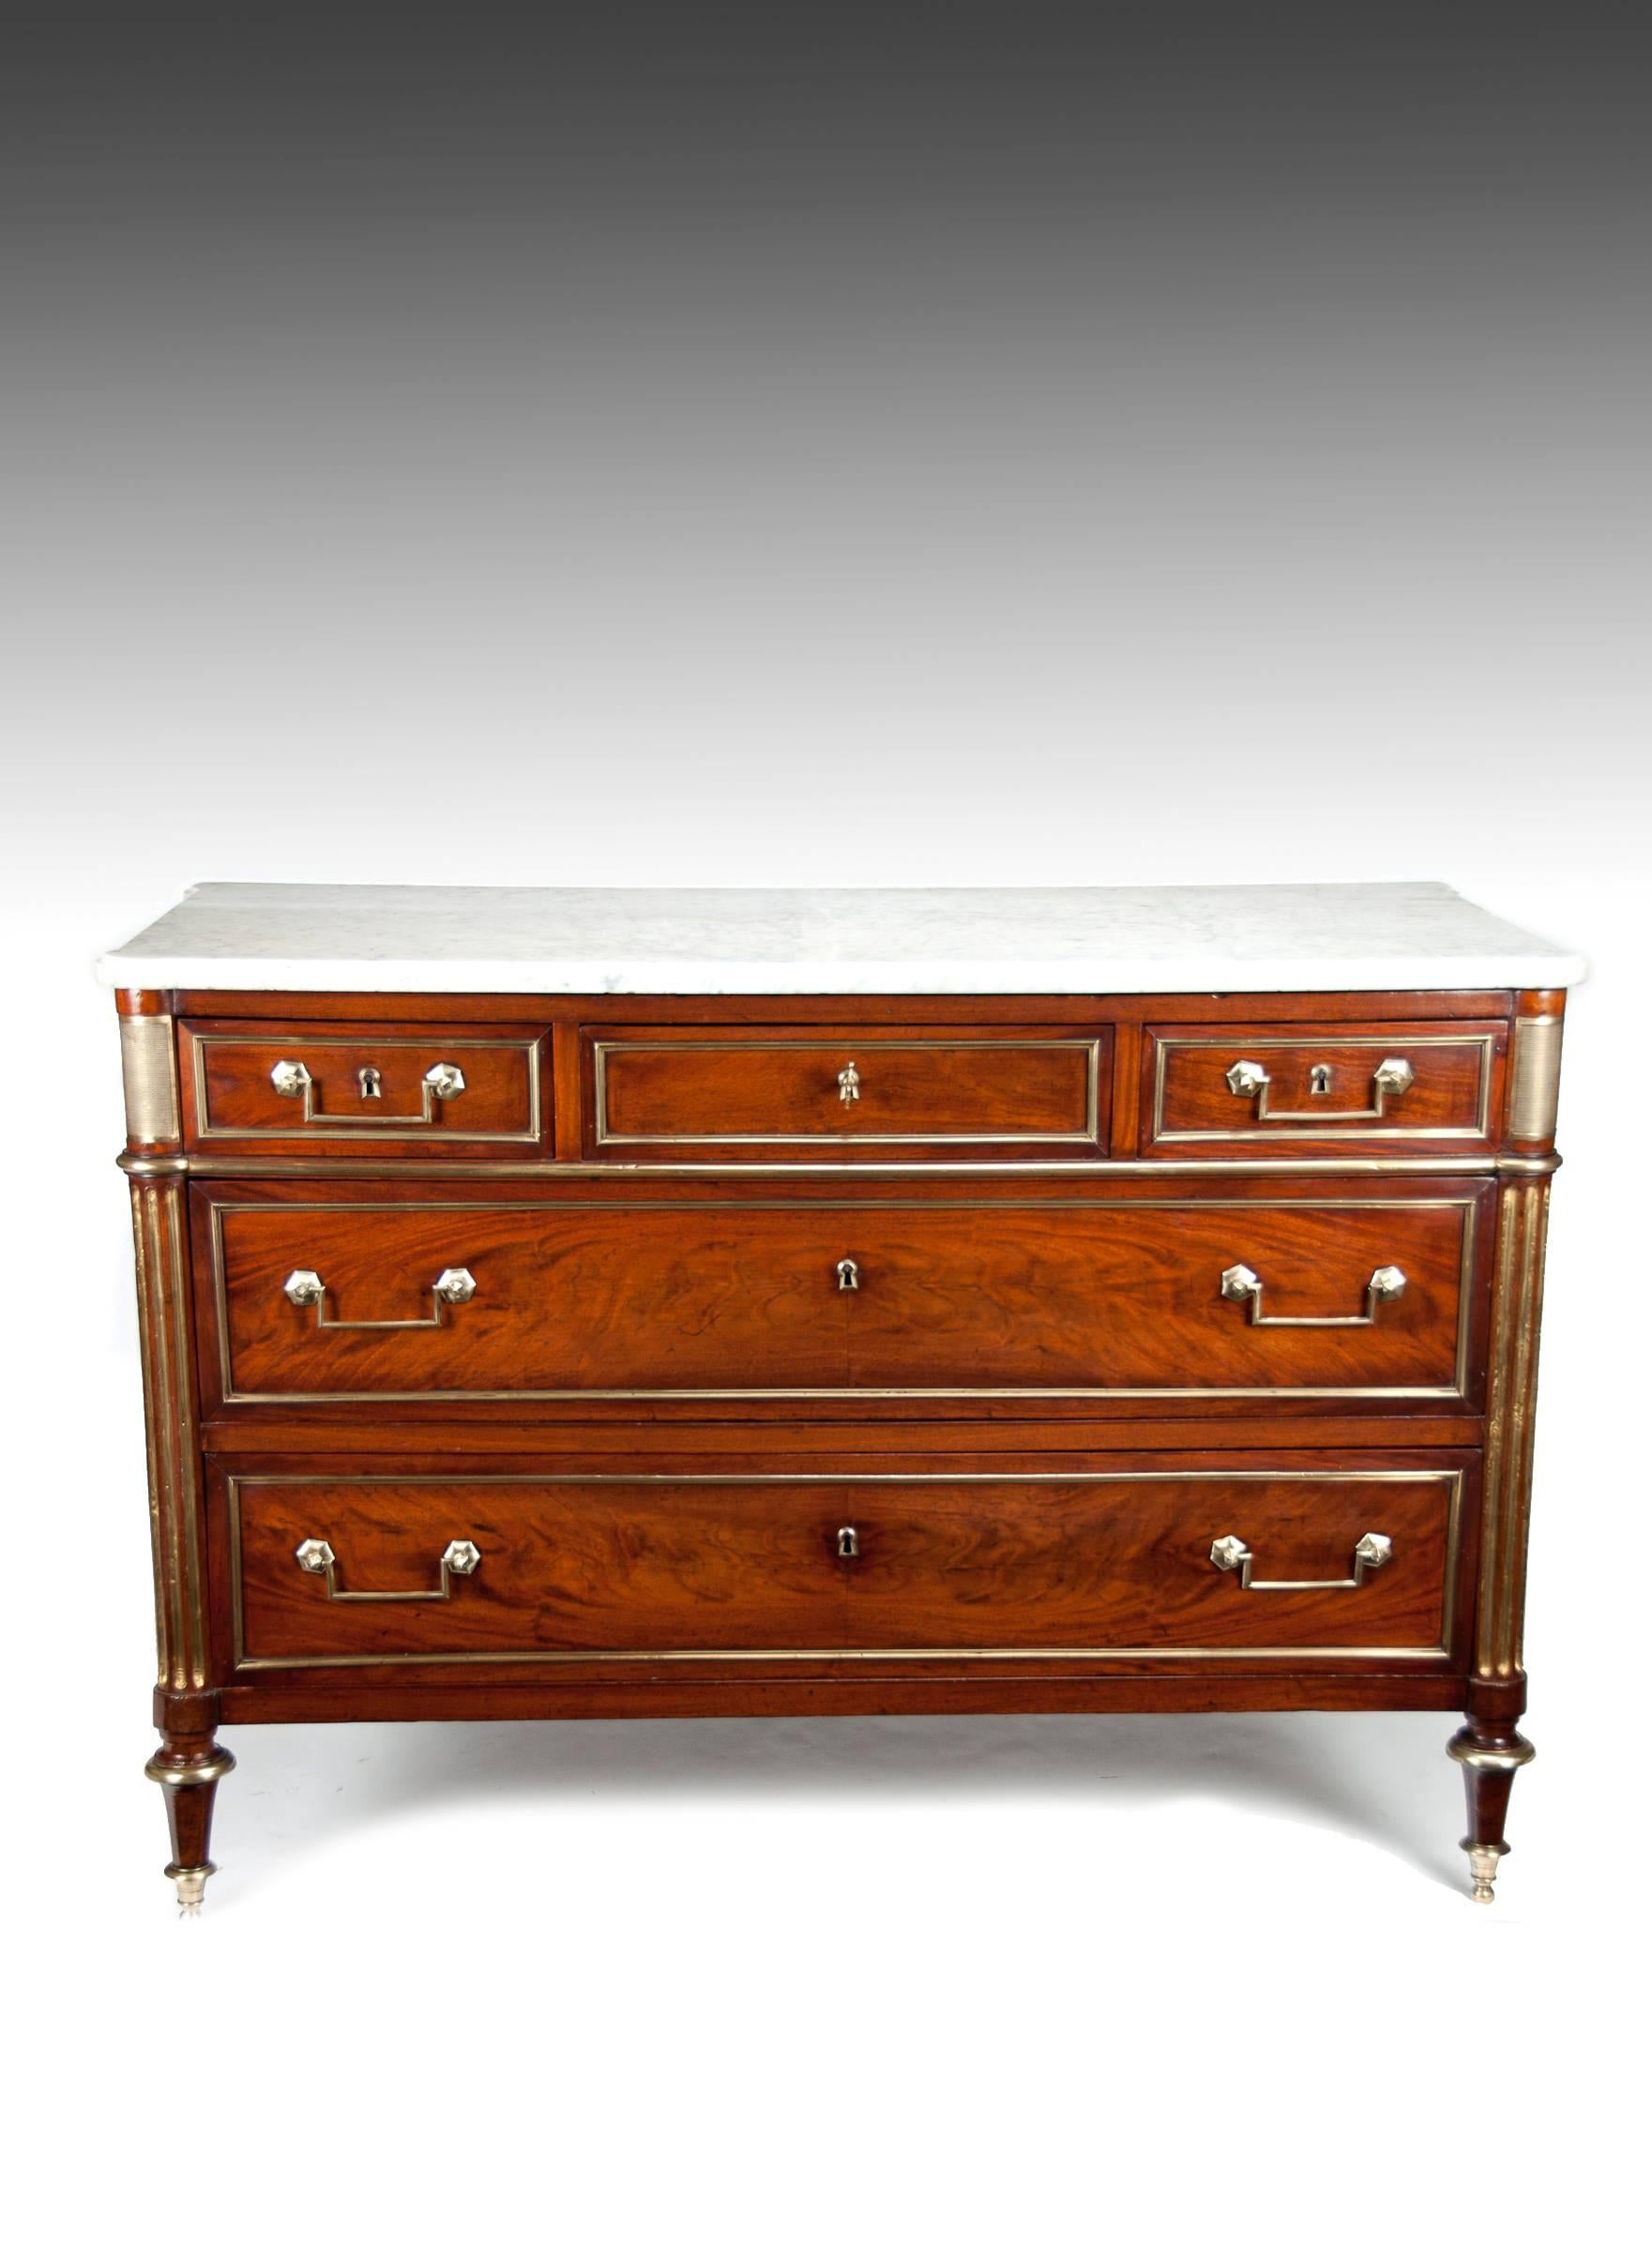 A fine quality French late 18th century Directoire period mahogany commode having a white and grey veined “Breche Verte” marble top with brass mounts, circa 1795.
The figured shaped breche verte marble top having moulded edge sits above three short